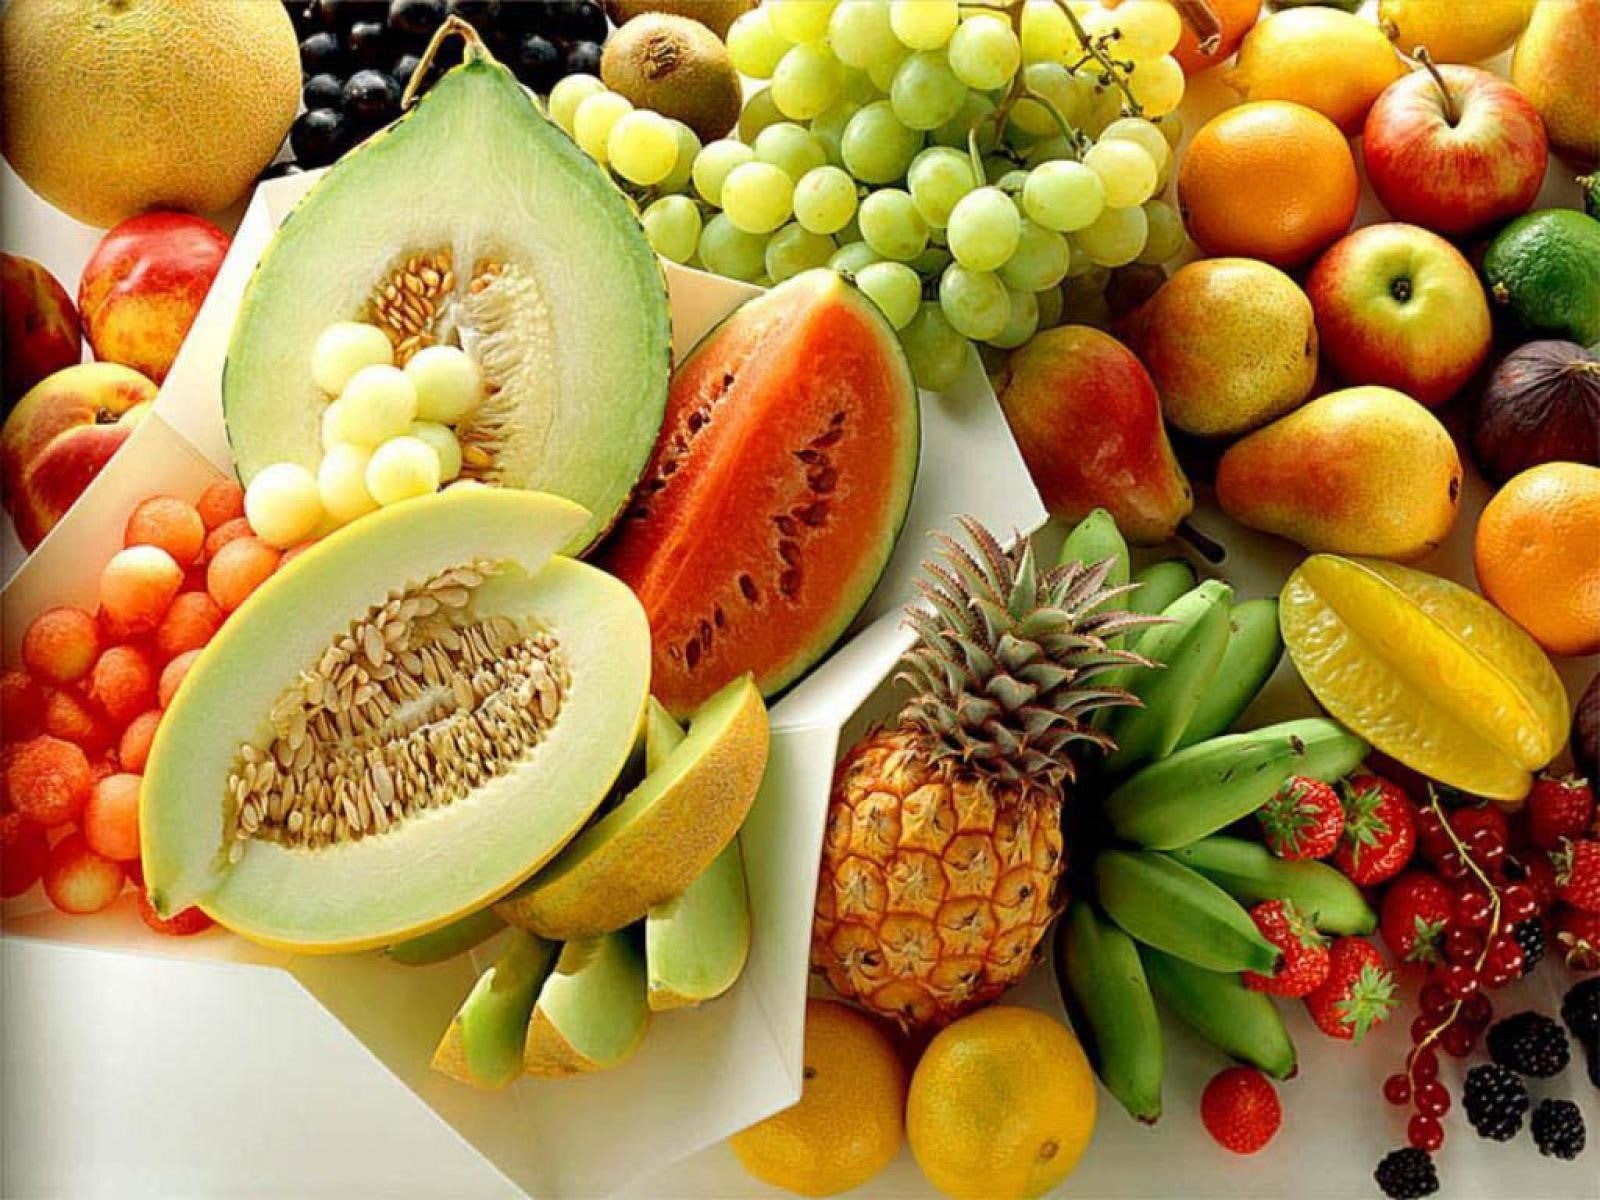 Fruit, Allsorts, Vitamins, healthy eating, food and drink, freshness